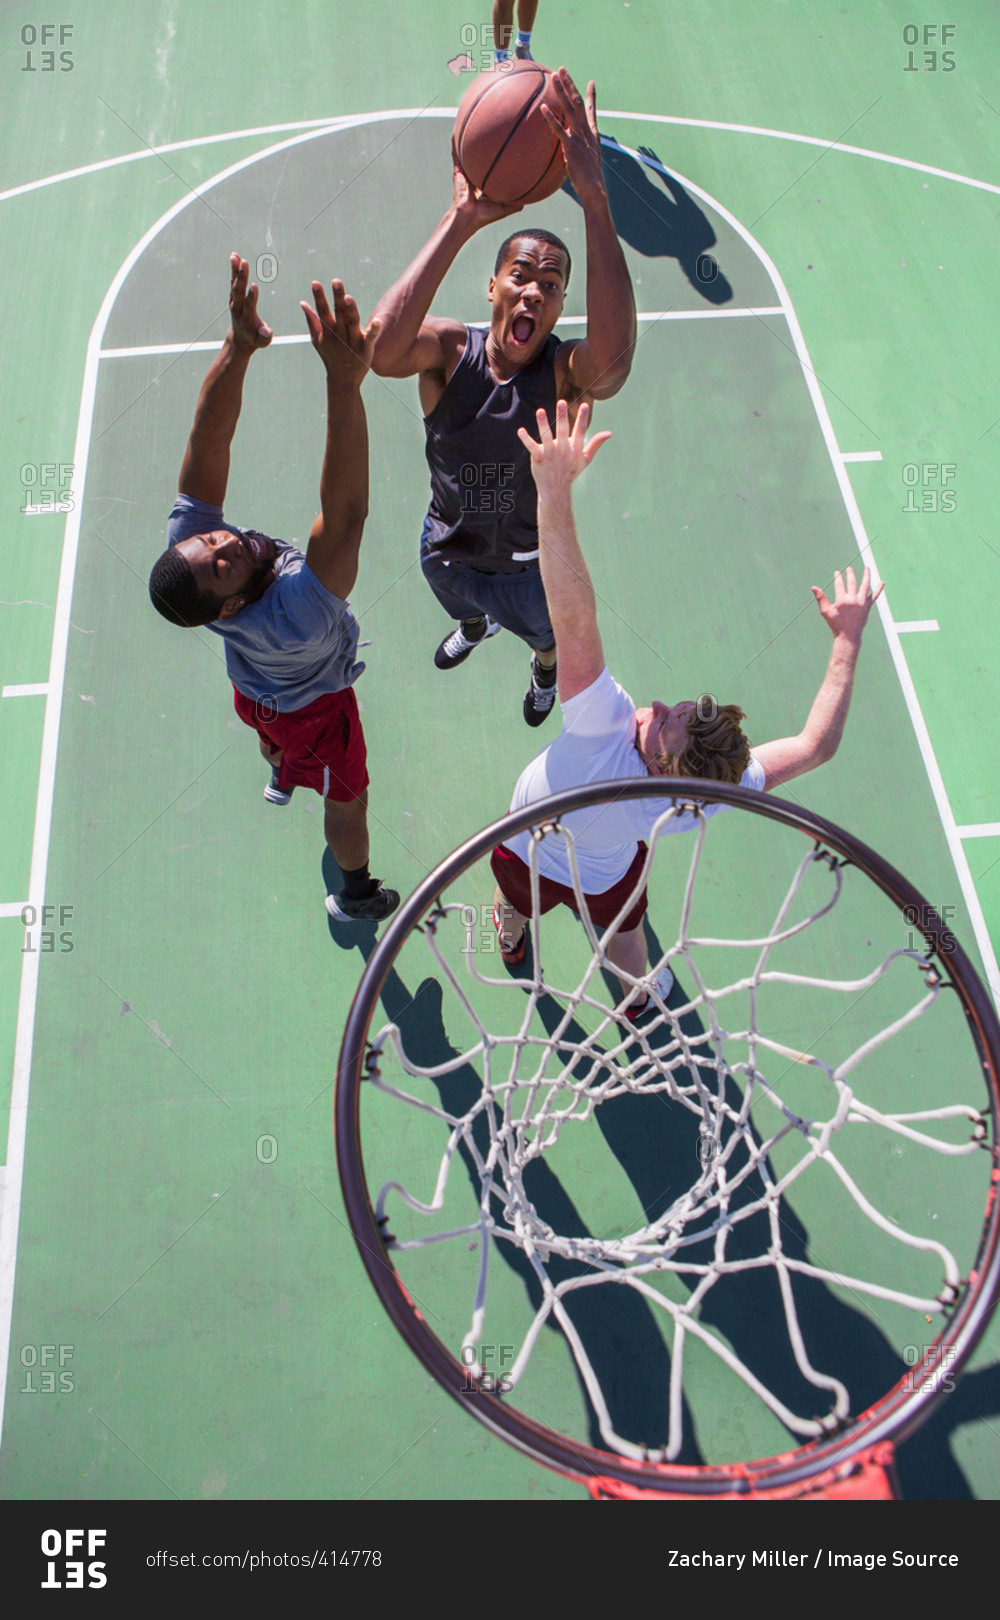 Group of male friends playing basketball on outdoor court, elevated view